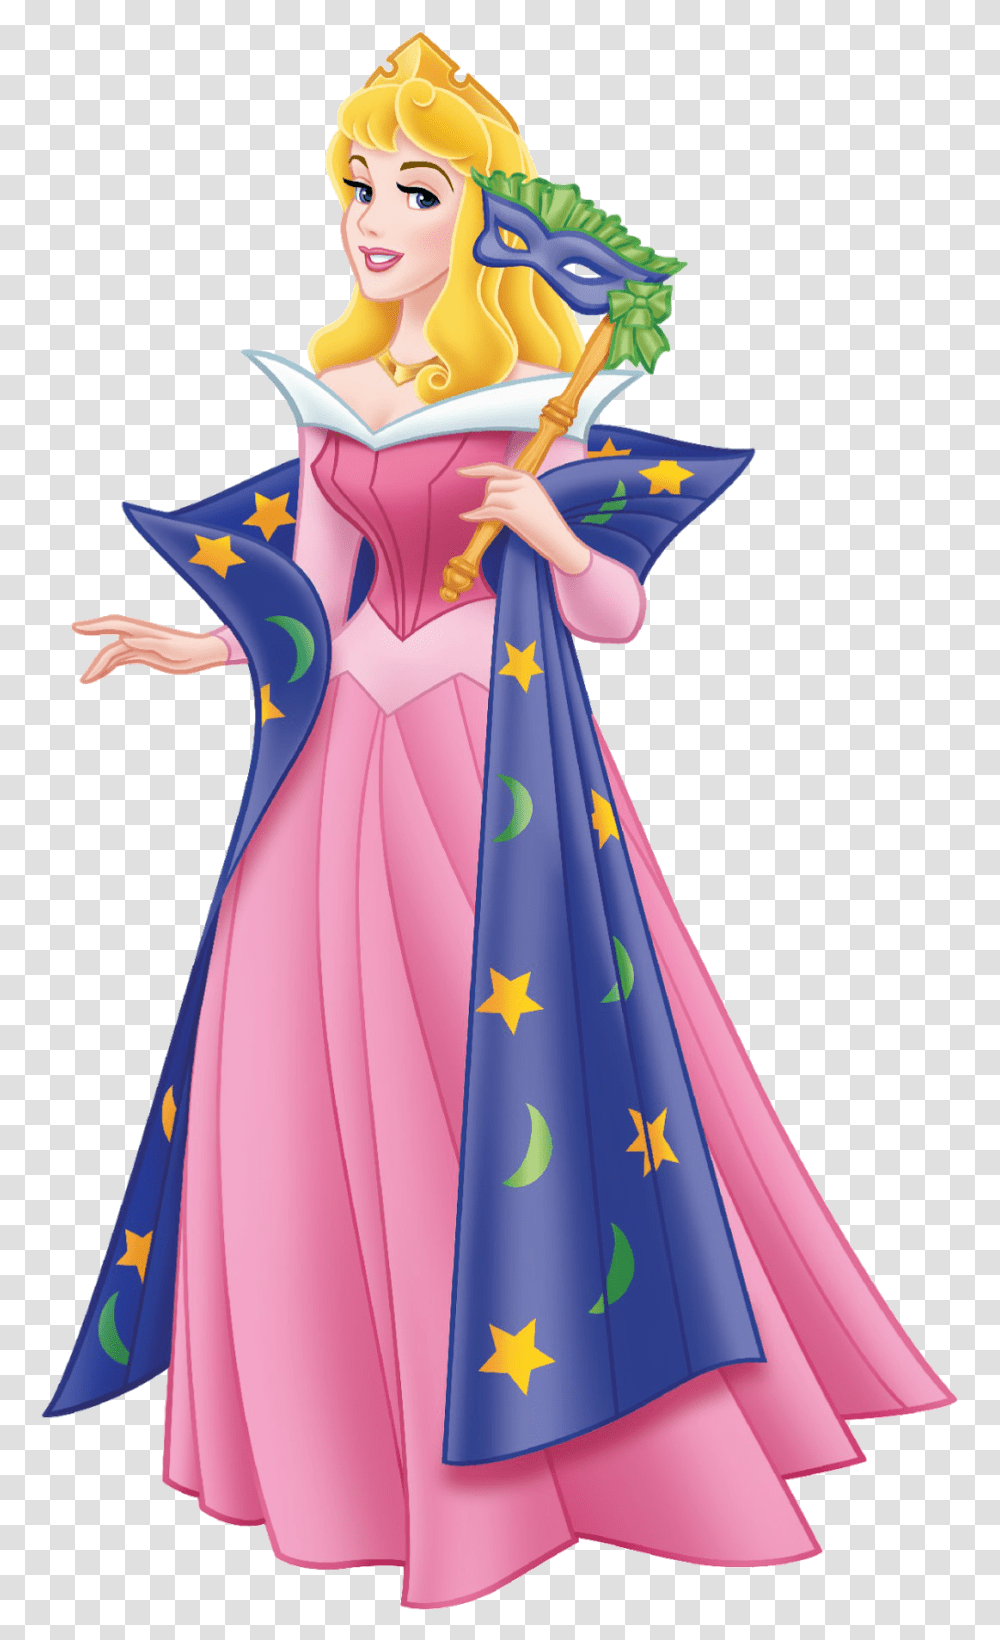 Sleeping Beauty Clipart Disney Princess Aurora And Prince Philip, Costume, Dress, Gown Transparent Png